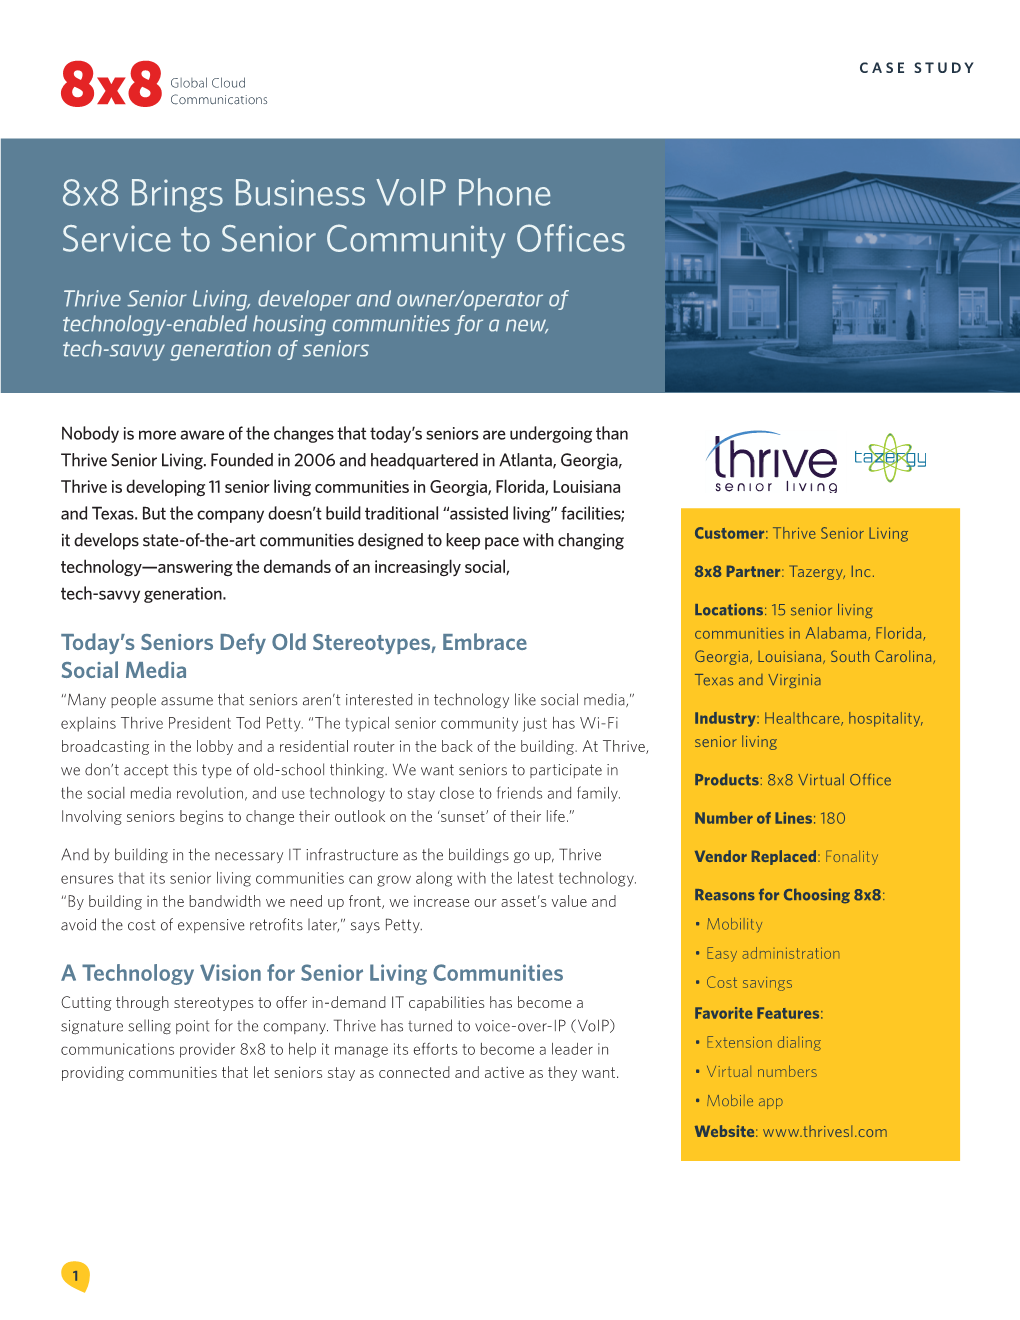 8X8 Brings Business Voip Phone Service to Senior Community Offices